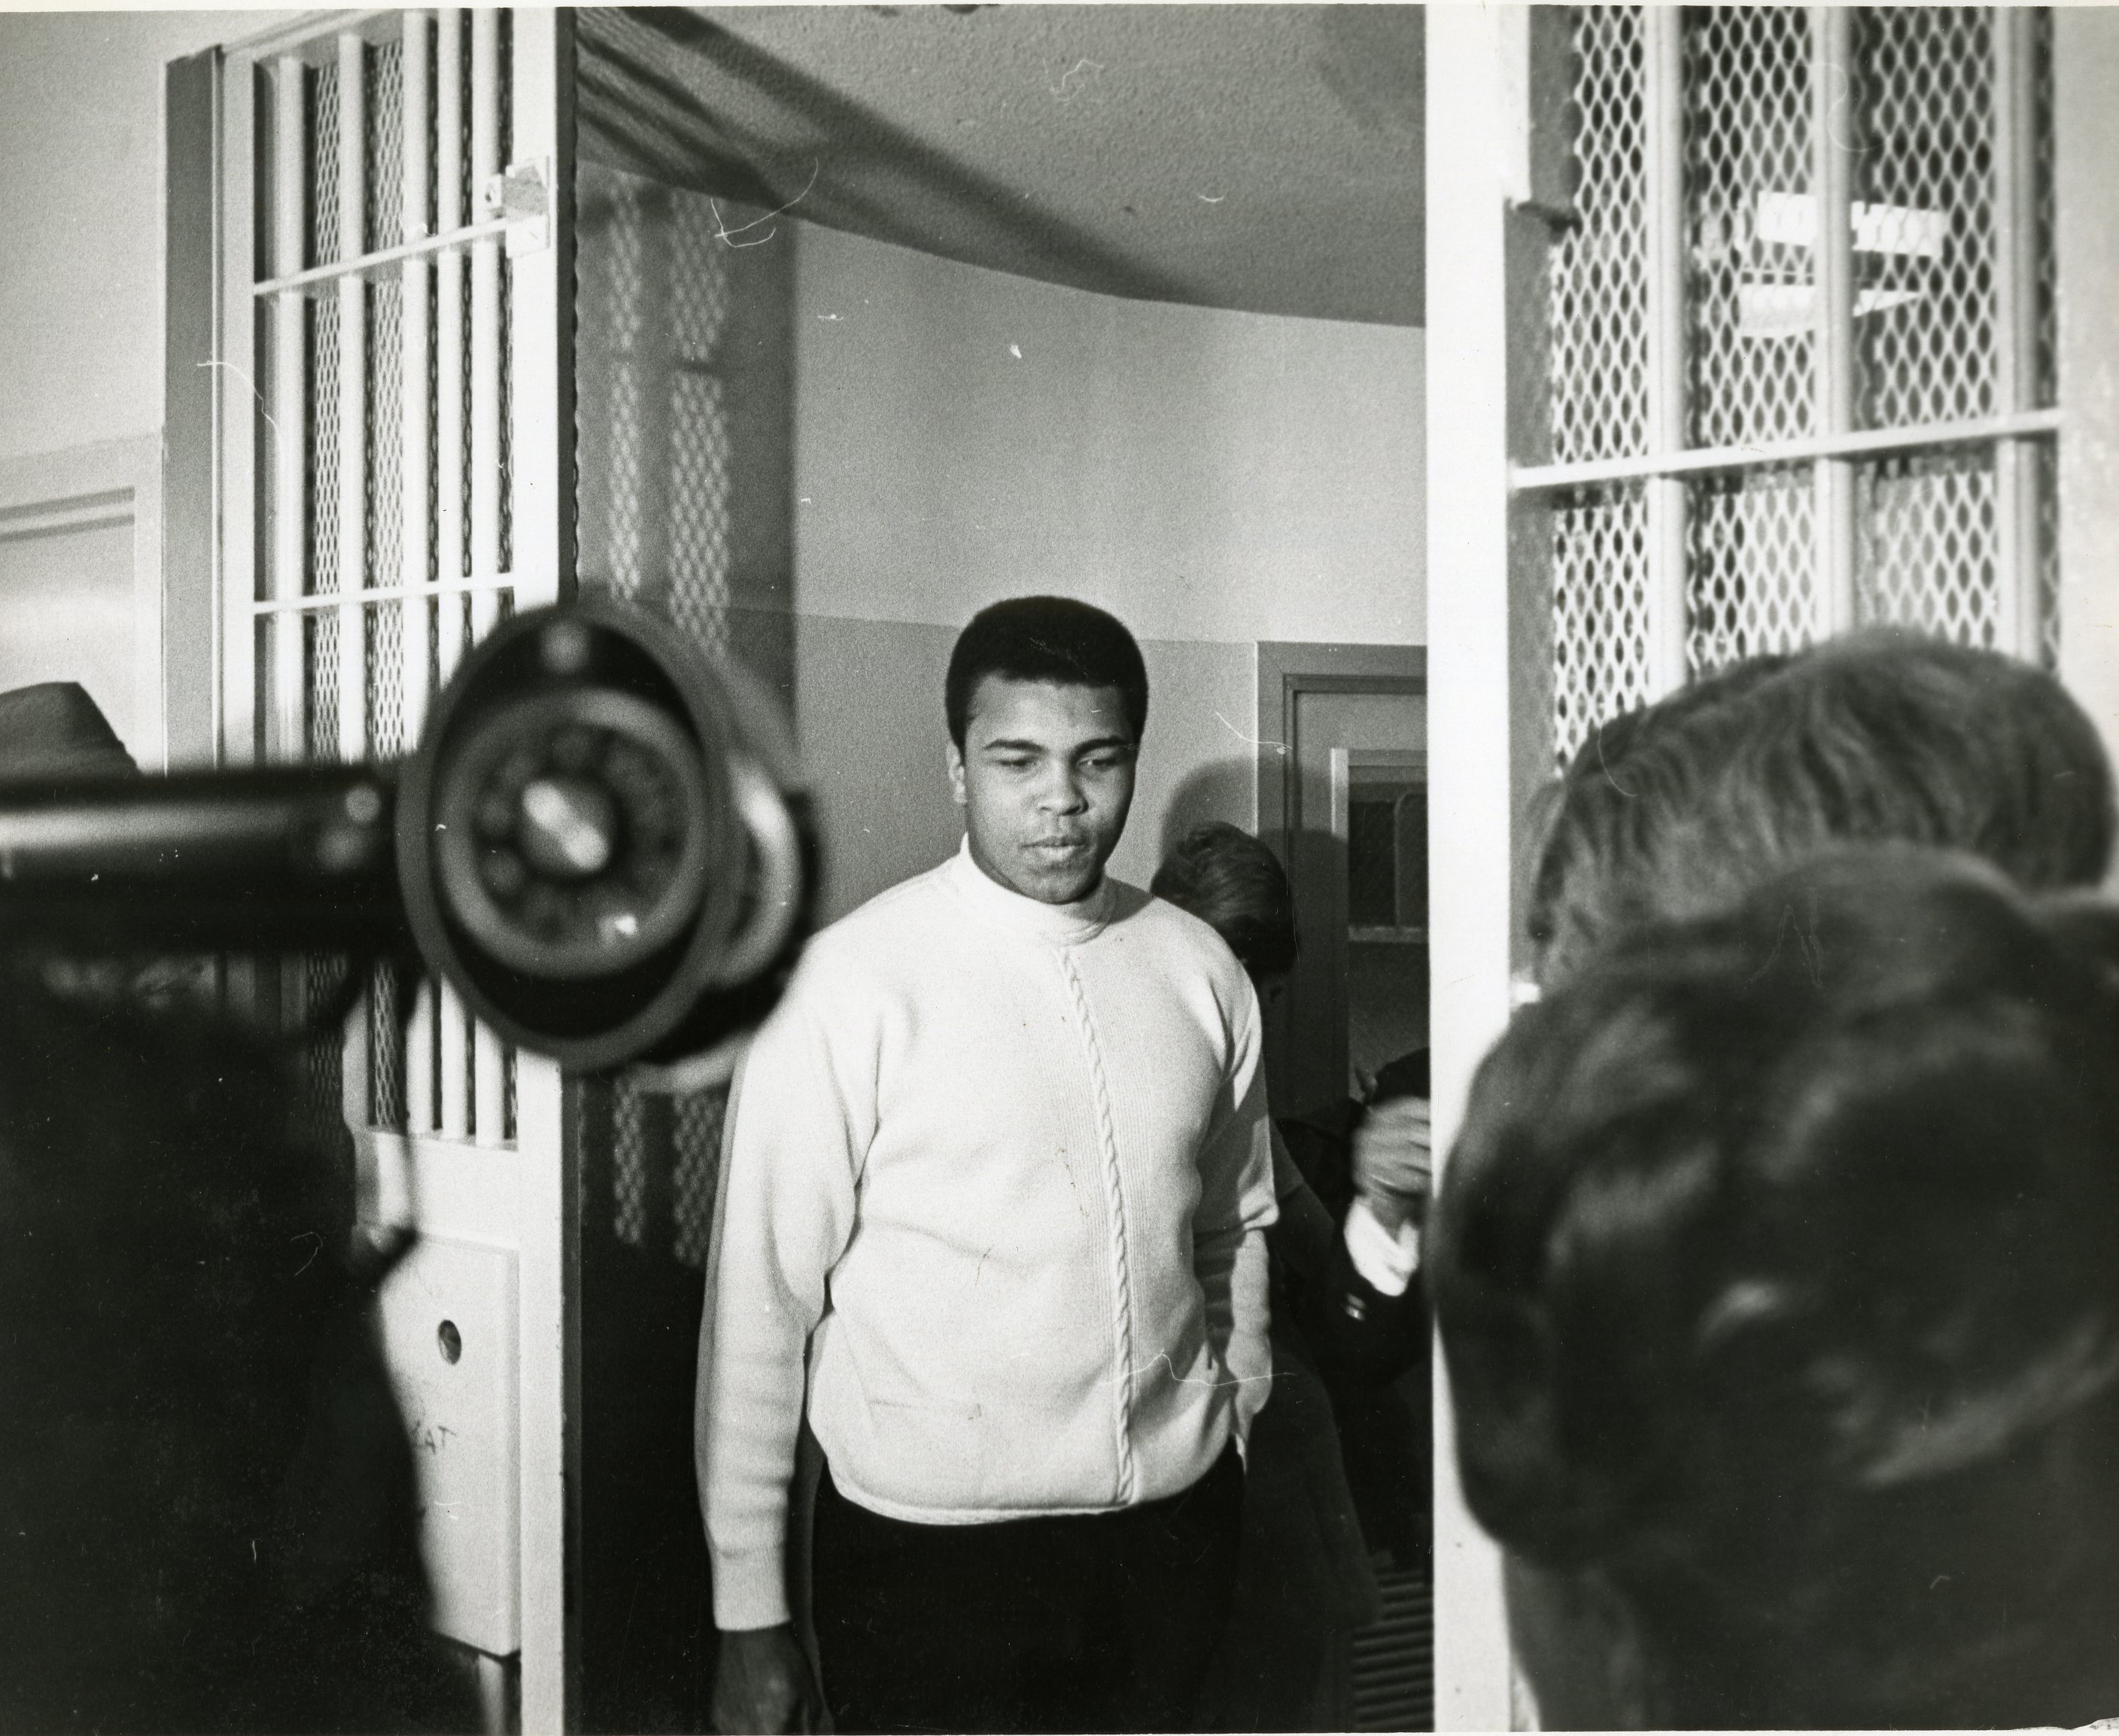 Dec. 12, 1968 - Florida, U.S. - December 12, 1968: Muhammad Ali at a Miami jail after being stopped on a traffic violation., Image: 256440678, License: Rights-managed, Restrictions: * Florida Sun Sentinel Rights OUT *, Model Release: no, Credit line: Profimedia, Zuma Press - News